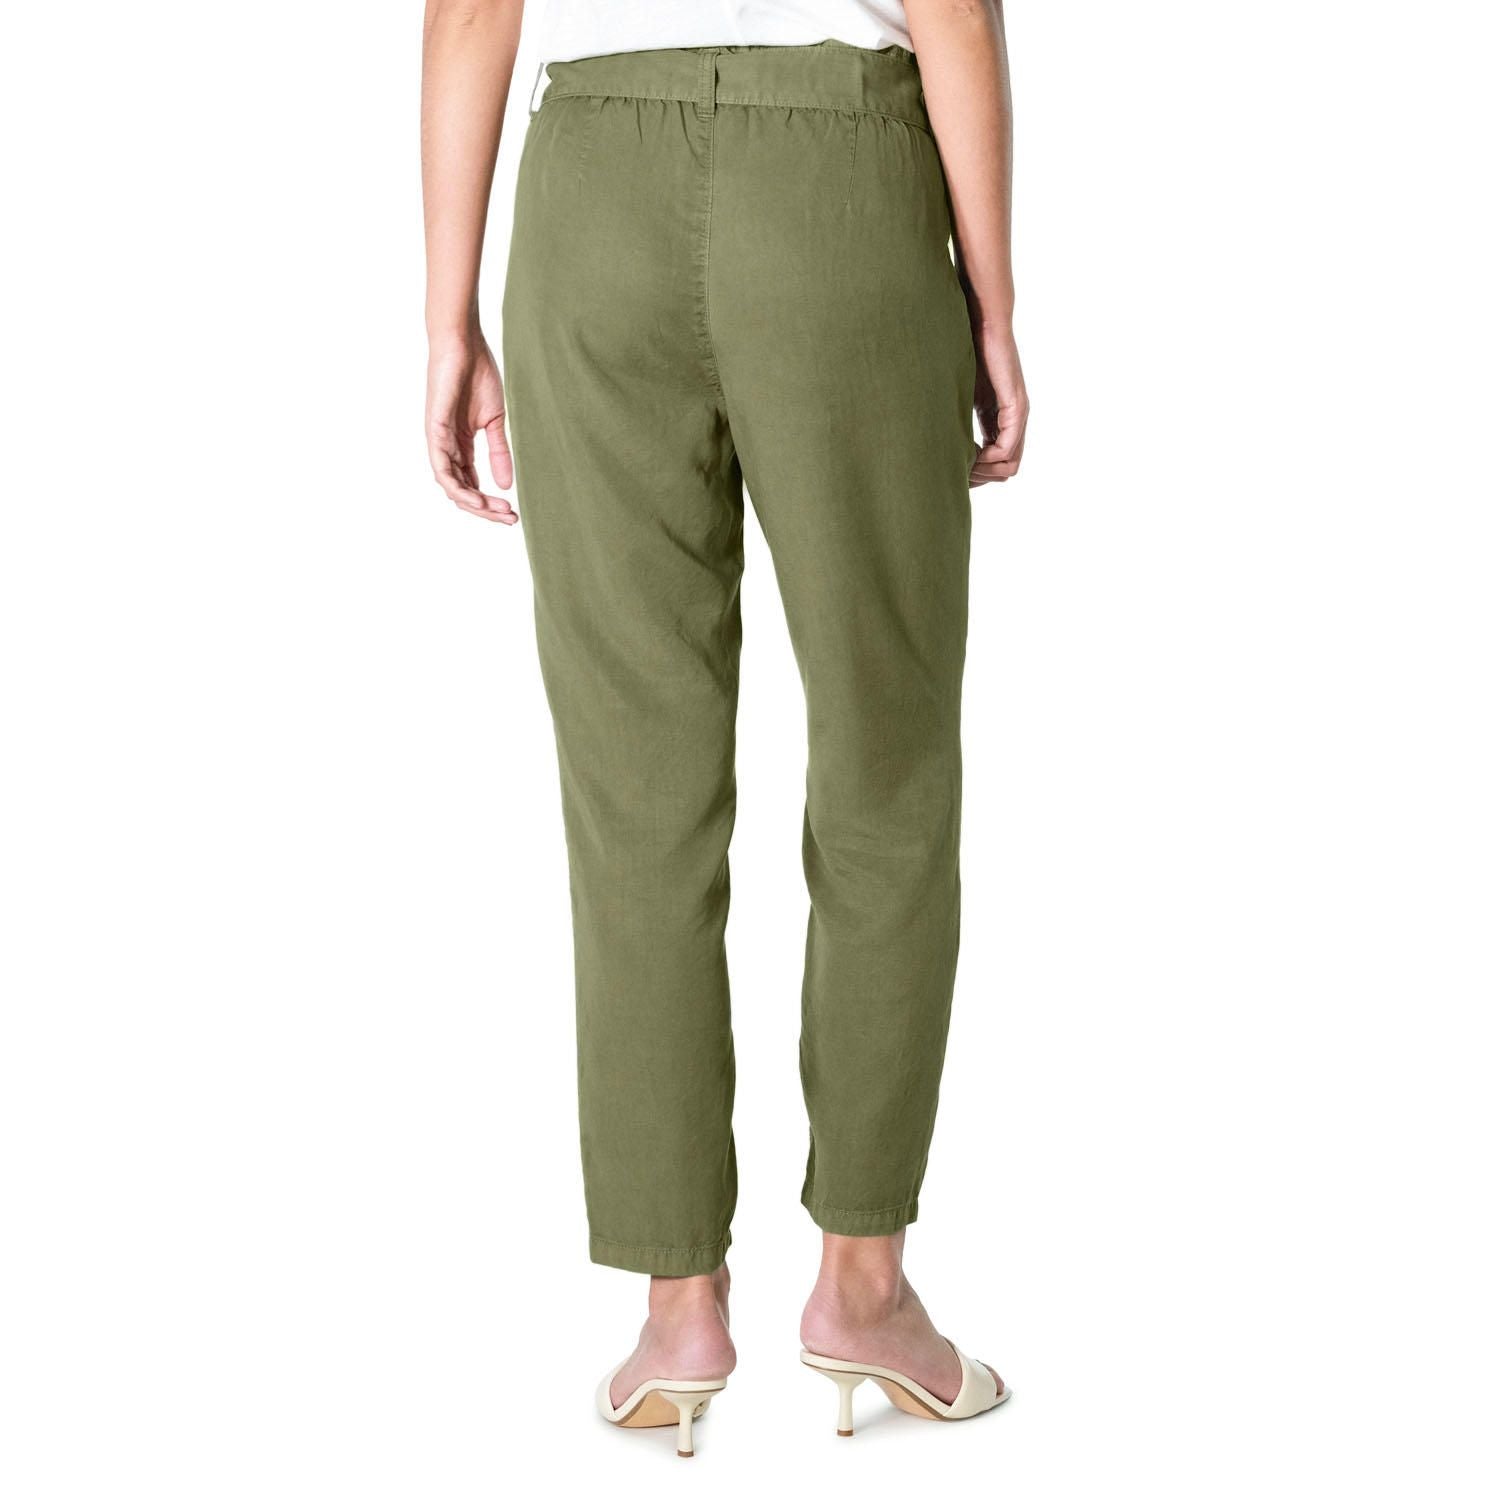 SOCIAL STANDARD by Sanctuary Ladies Melody Pant in Willow, M